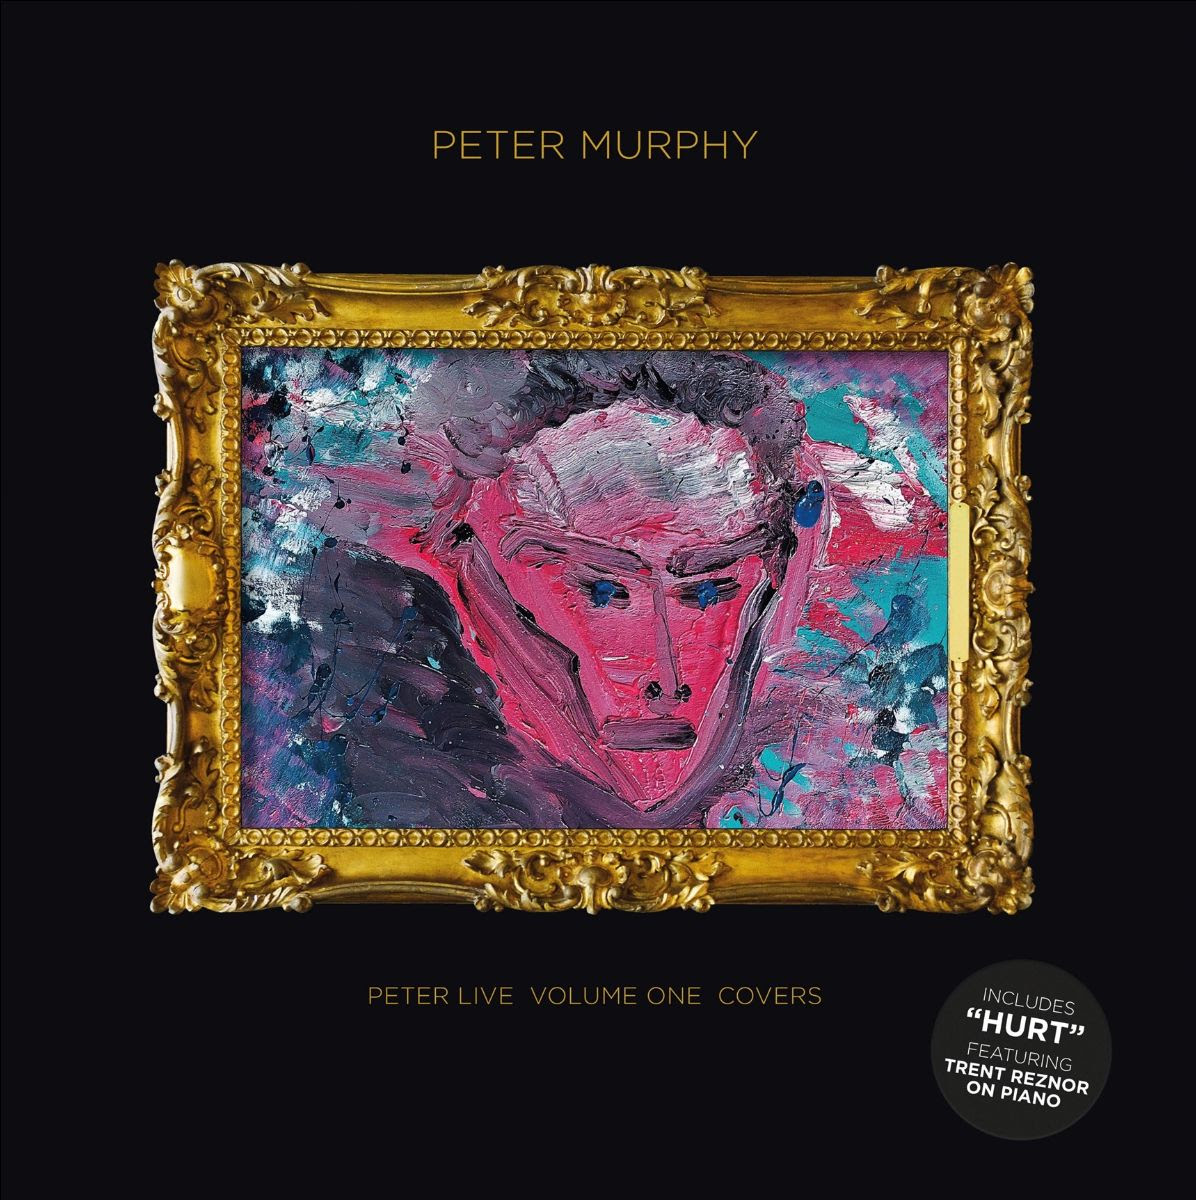 Bauhaus frontman Peter Murphy launches new record label Silver Shade with two live releases